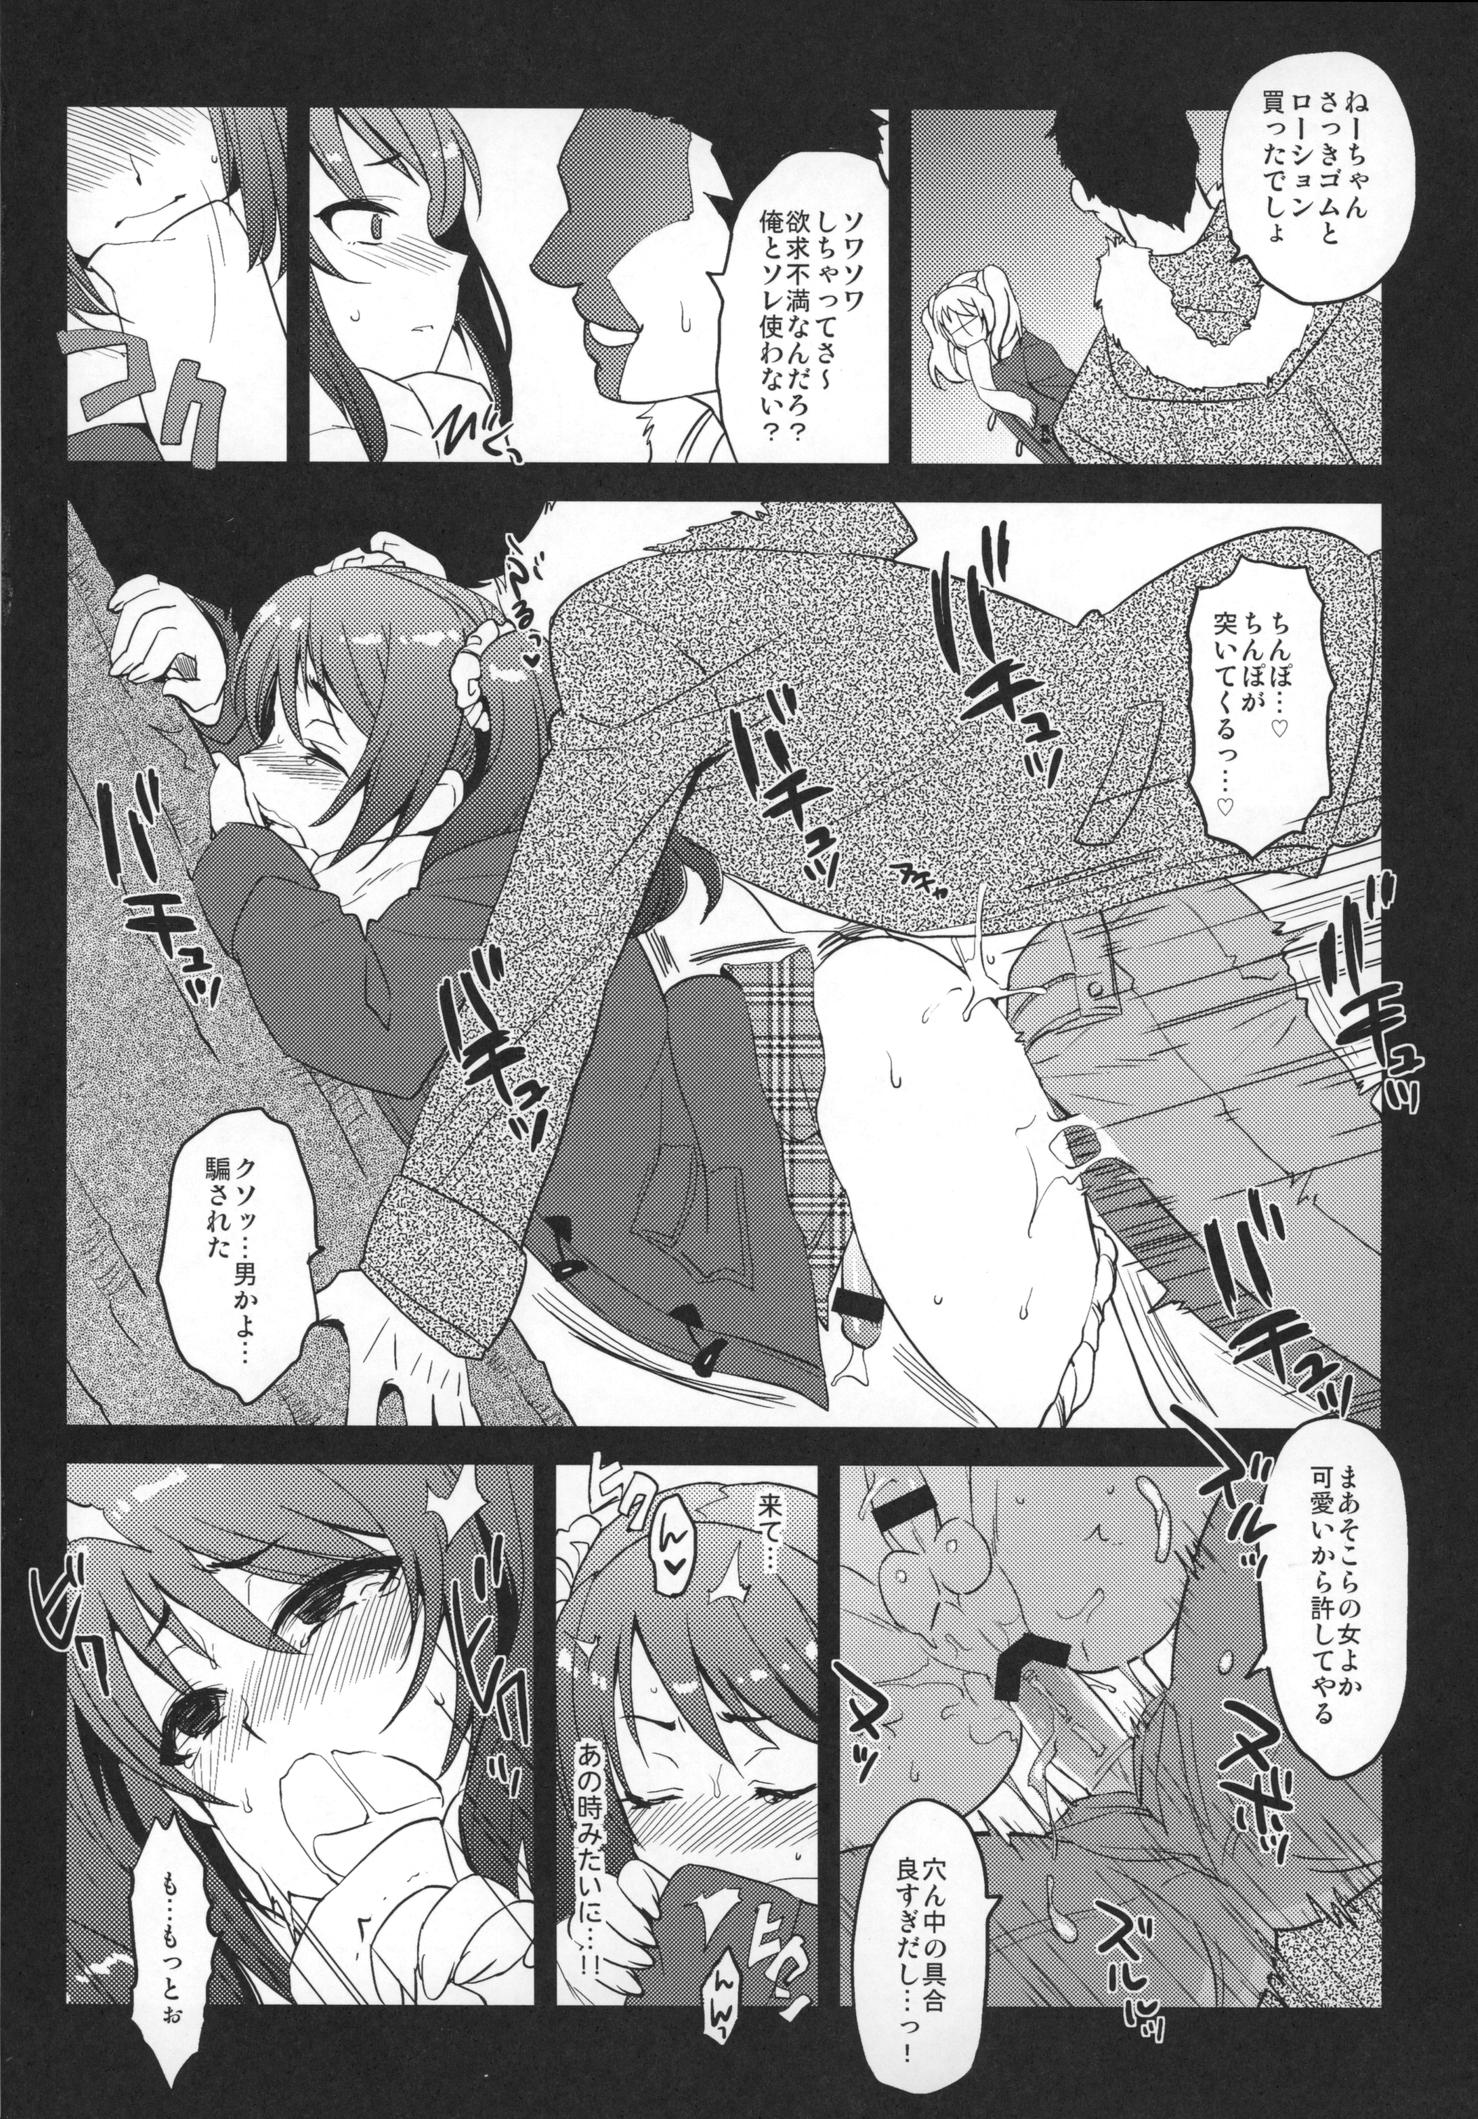 Spoon sideMess+ - The idolmaster Girl Get Fuck - Page 7